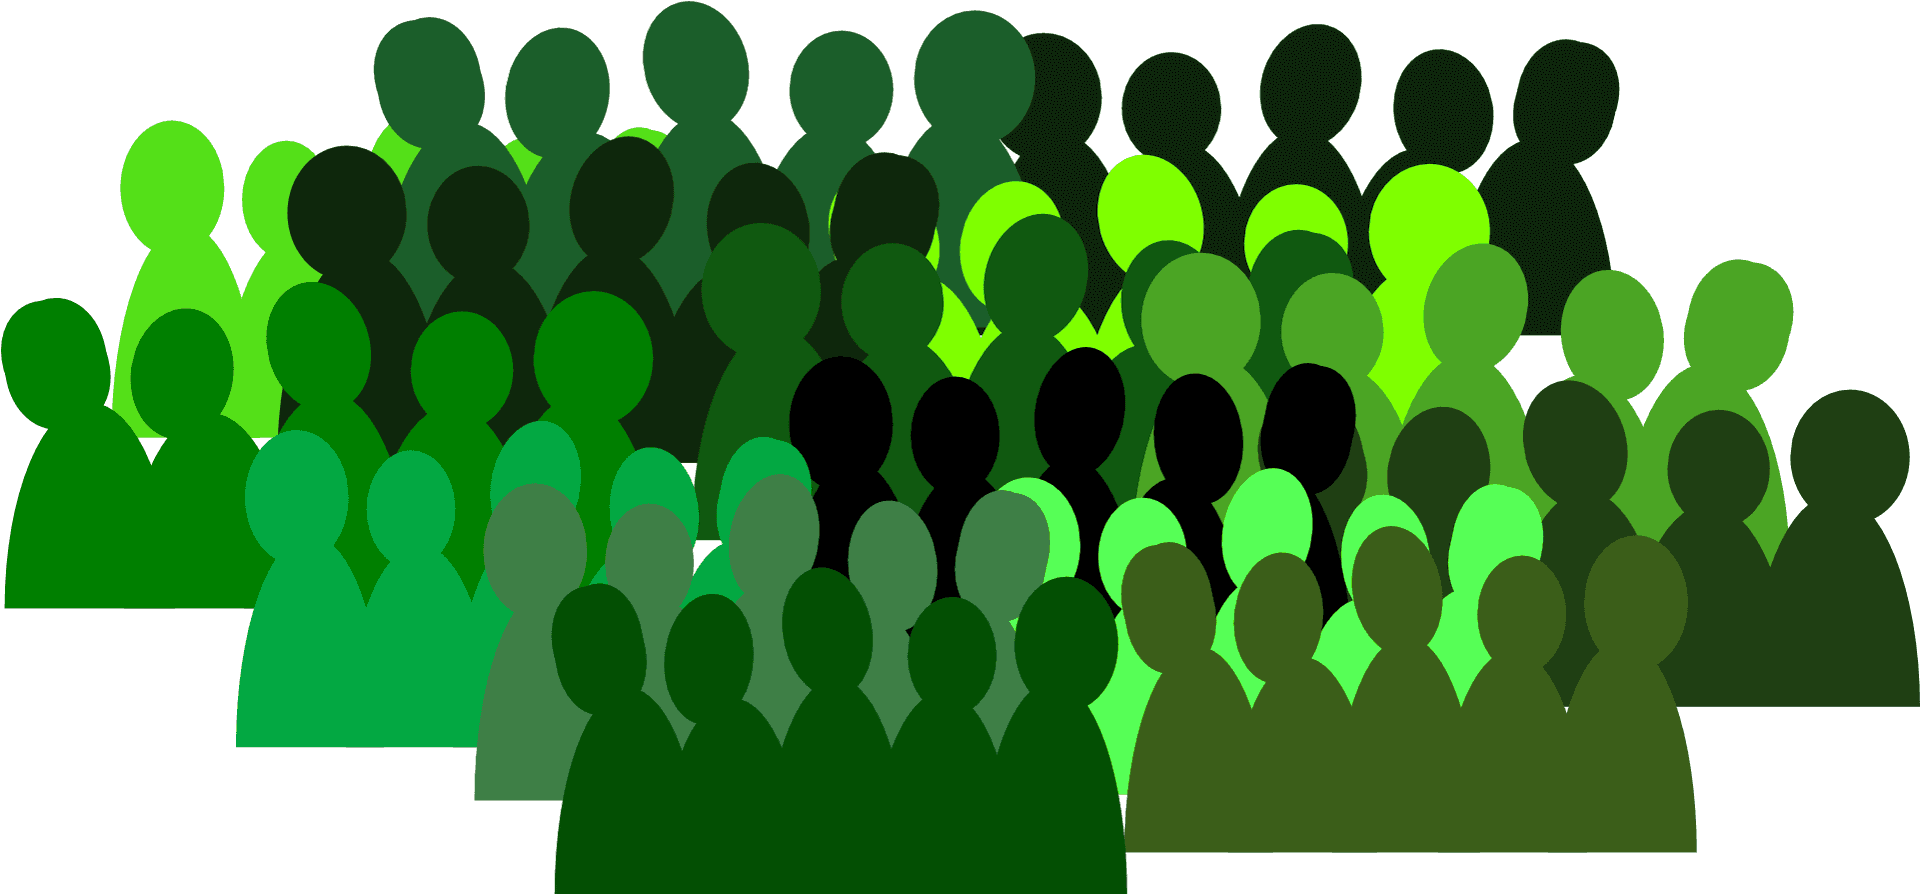 Abstract Crowd Gathering.png PNG